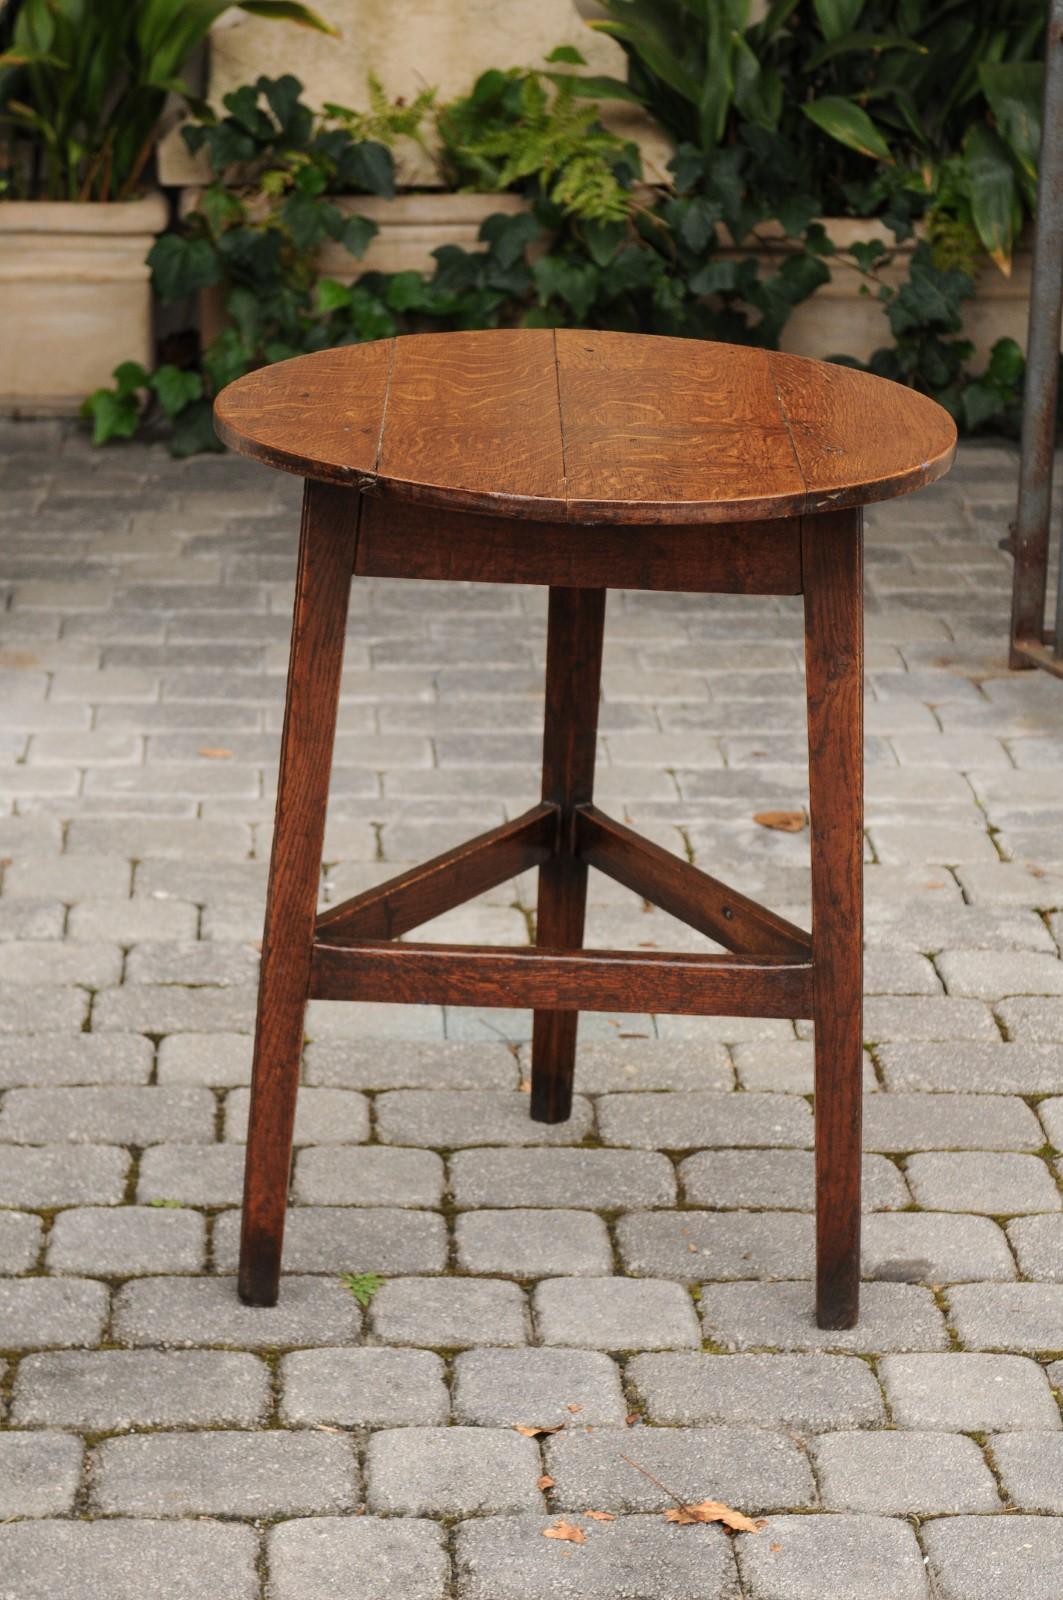 An English oak cricket table from the mid-19th century, with circular top and triangular side stretcher. Born during the third quarter of the 19th century, this rustic cricket side table features a circular top, sitting above a simple triangular